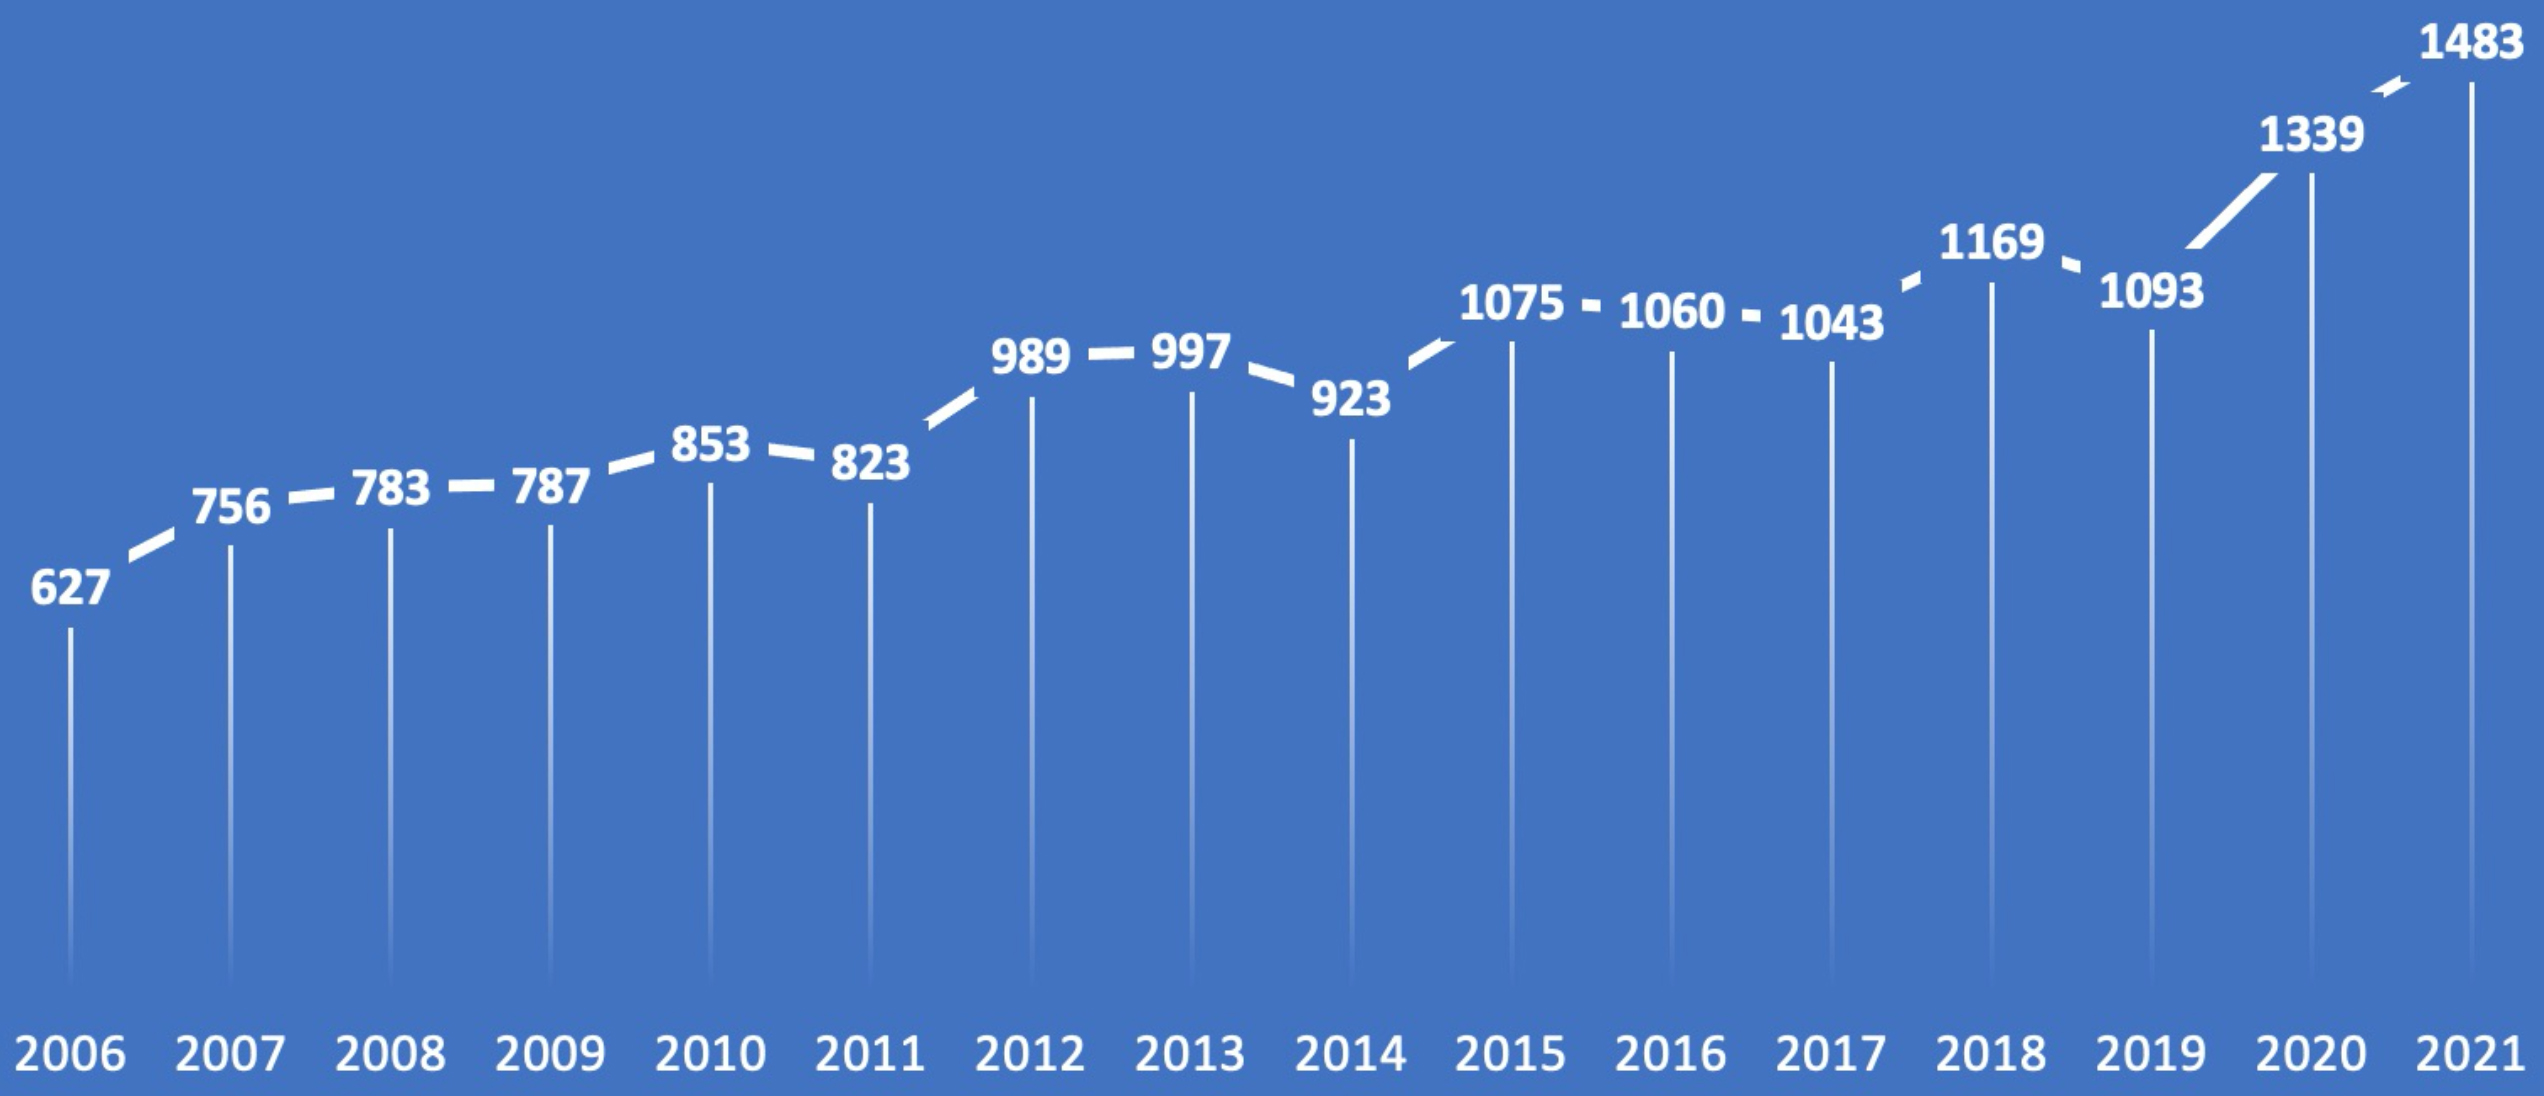 The total number of citations per year (2006–2021).